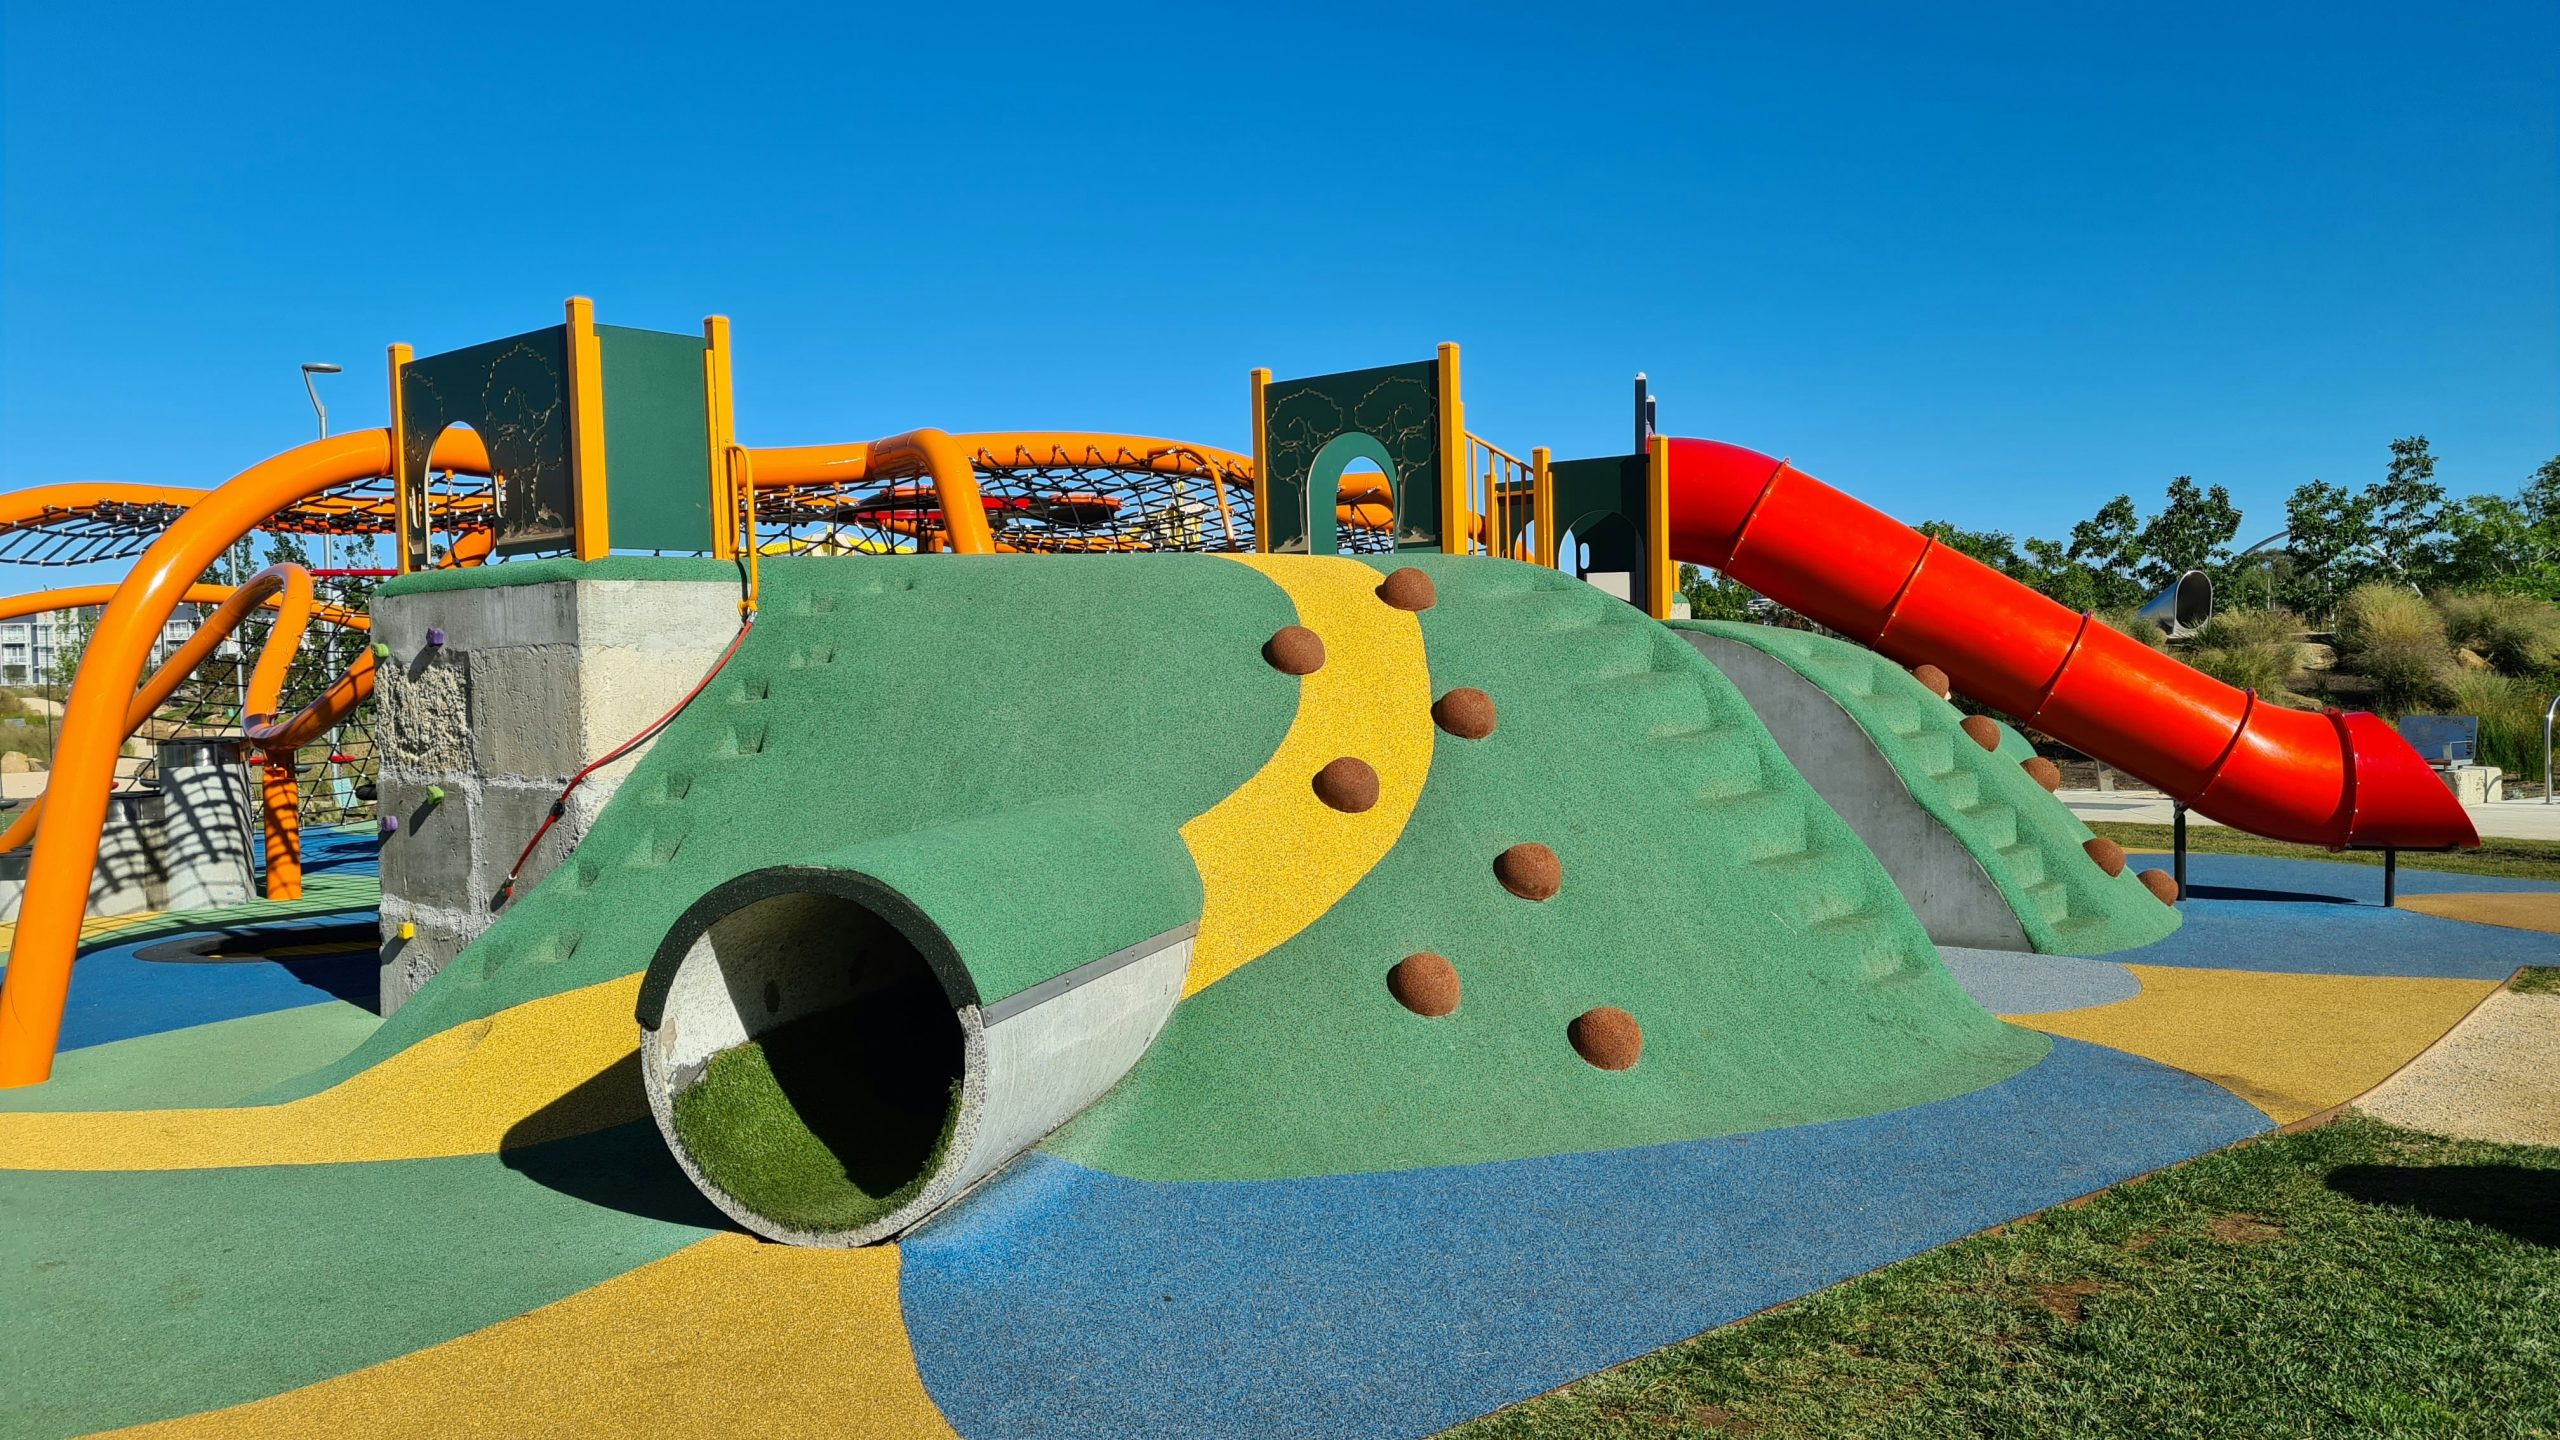 Colourful Playground with tunnels, slides, climbing grips in the sun